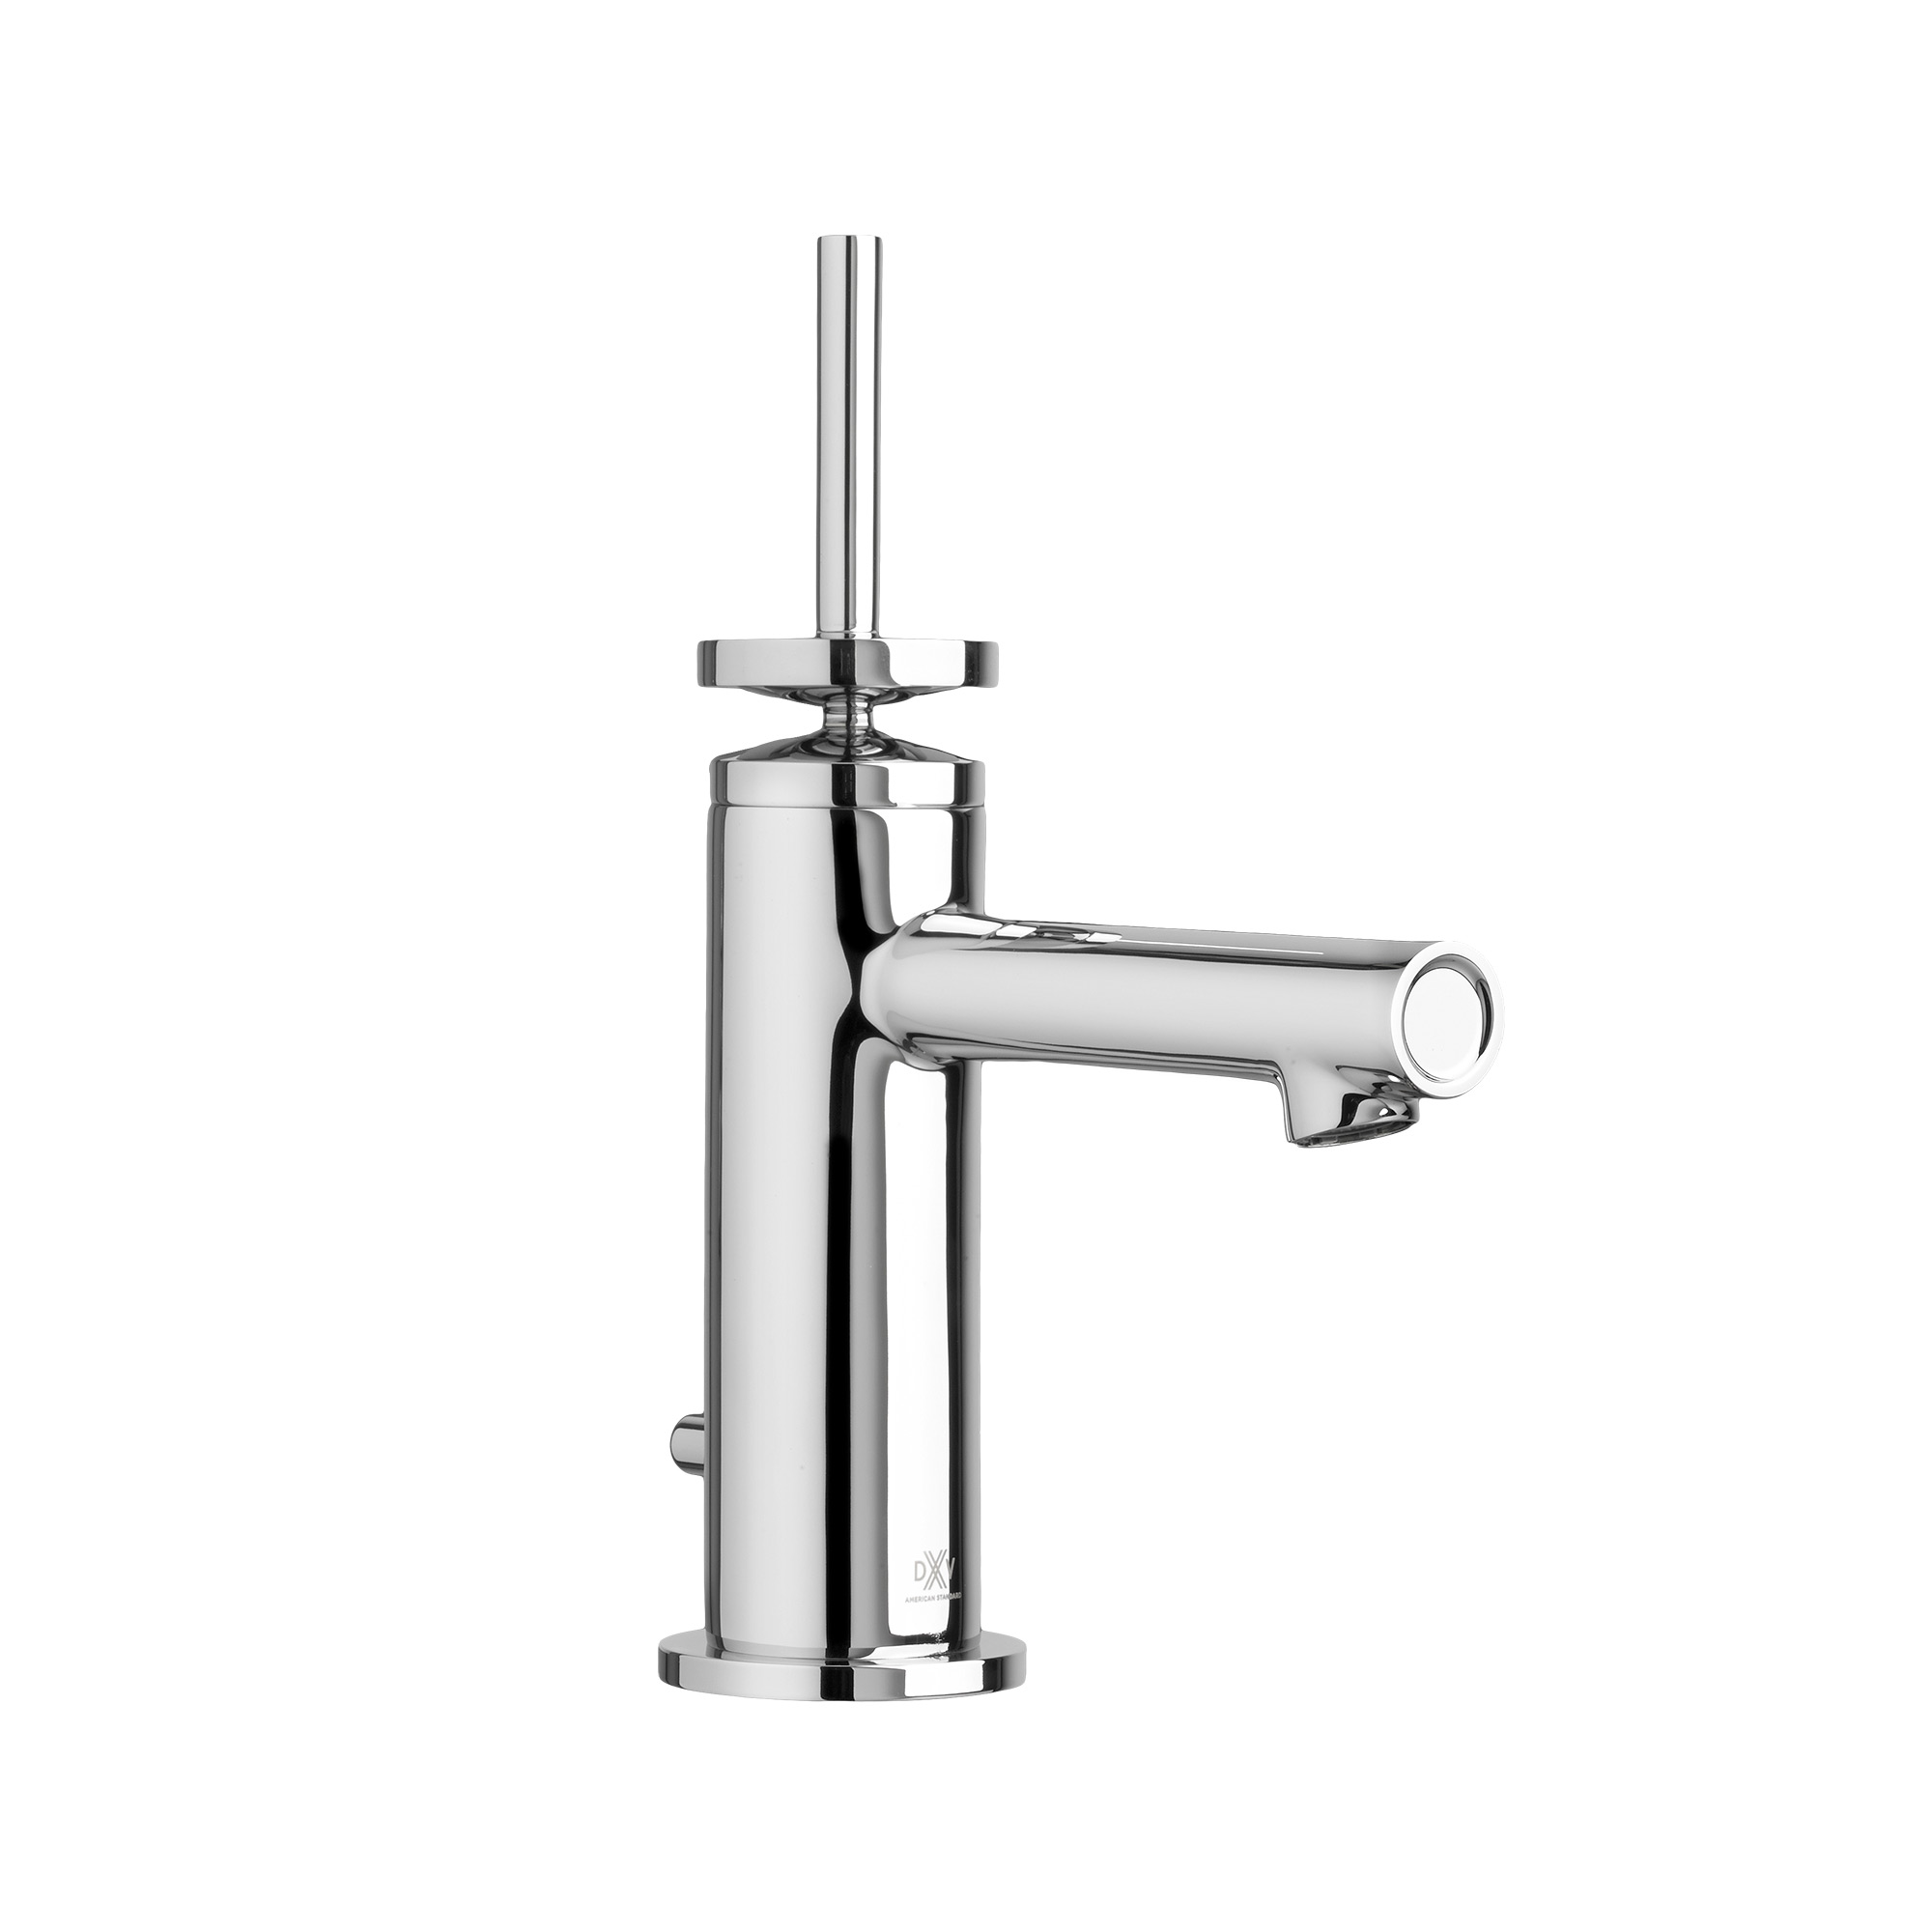 Percy® Single Handle Bathroom Faucet with Stem Handle